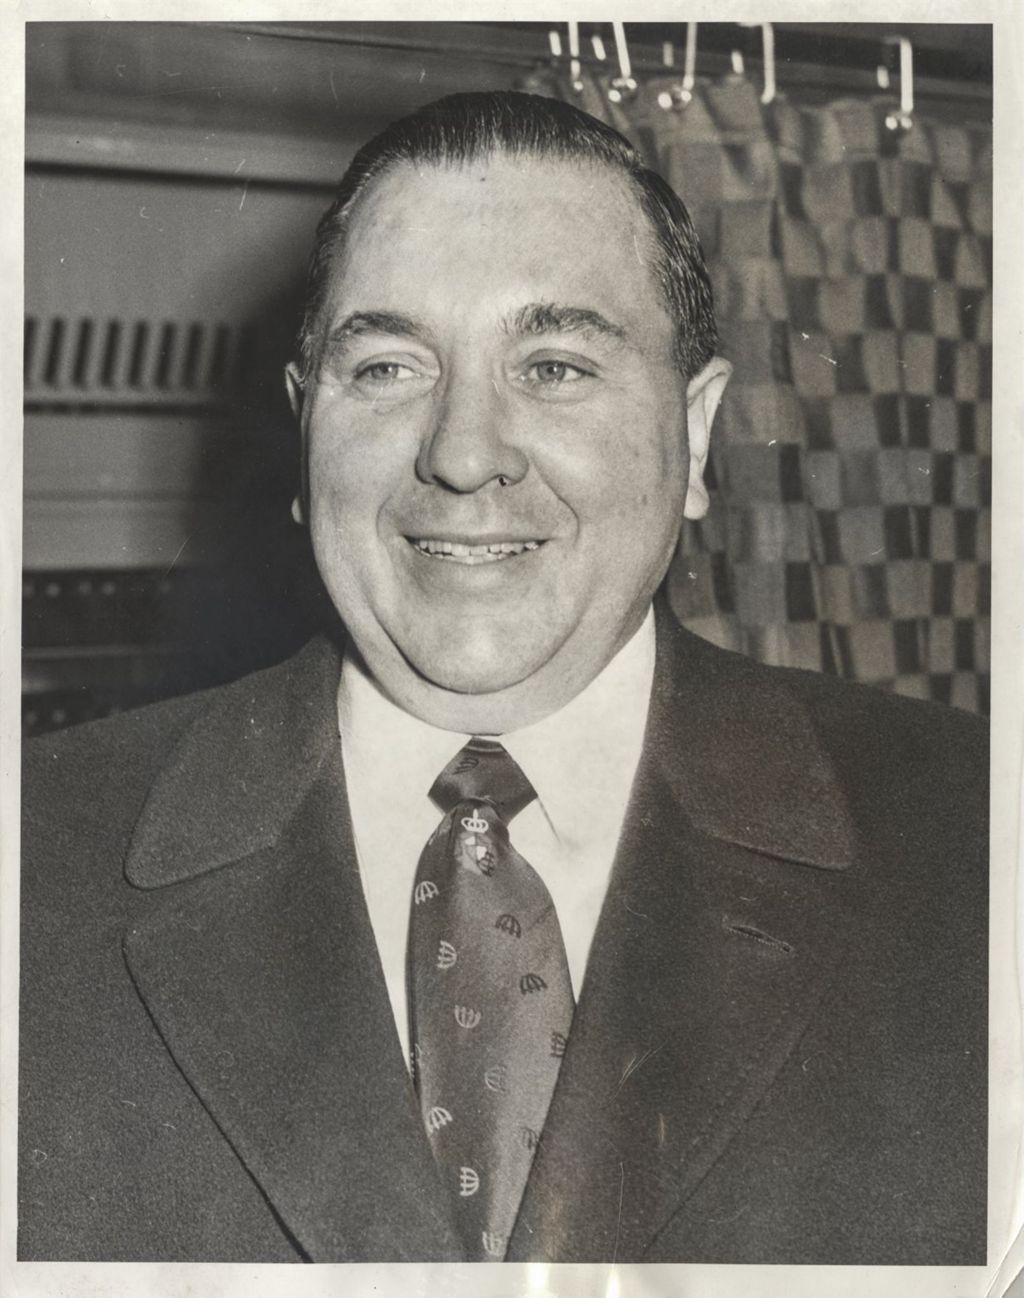 Richard J. Daley in front of a voting booth